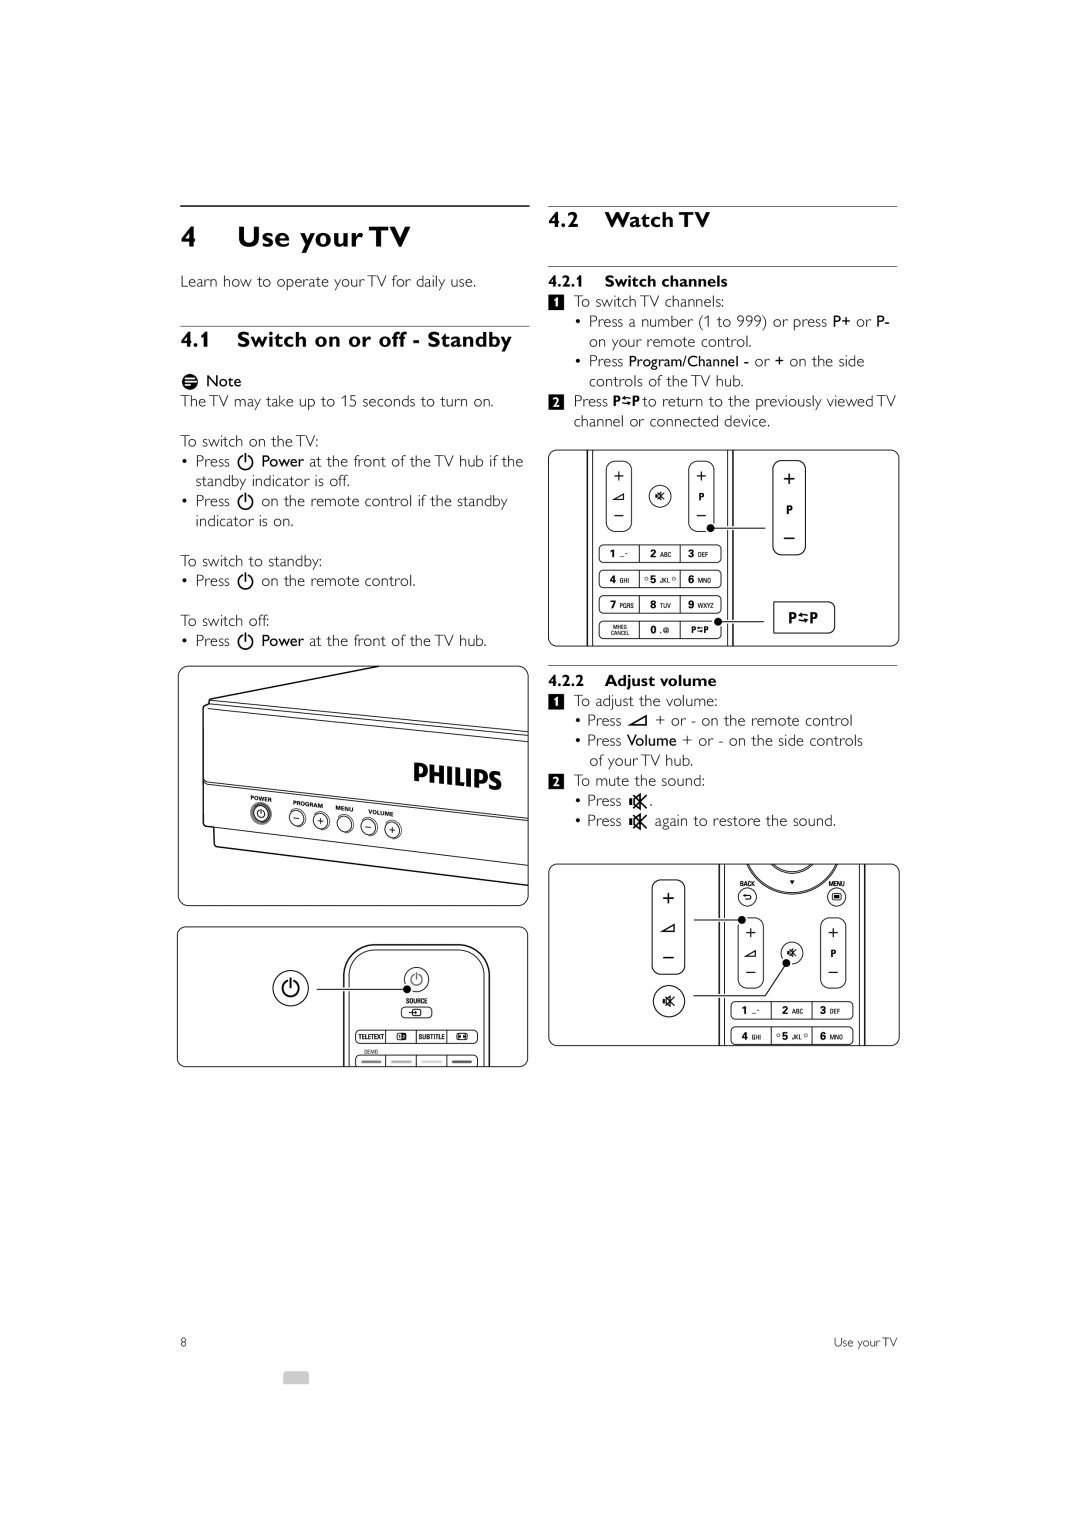 Philips 42PES0001D/H manual Use your TV, Switch on or off - Standby, Watch TV, Switch channels, Adjust volume 